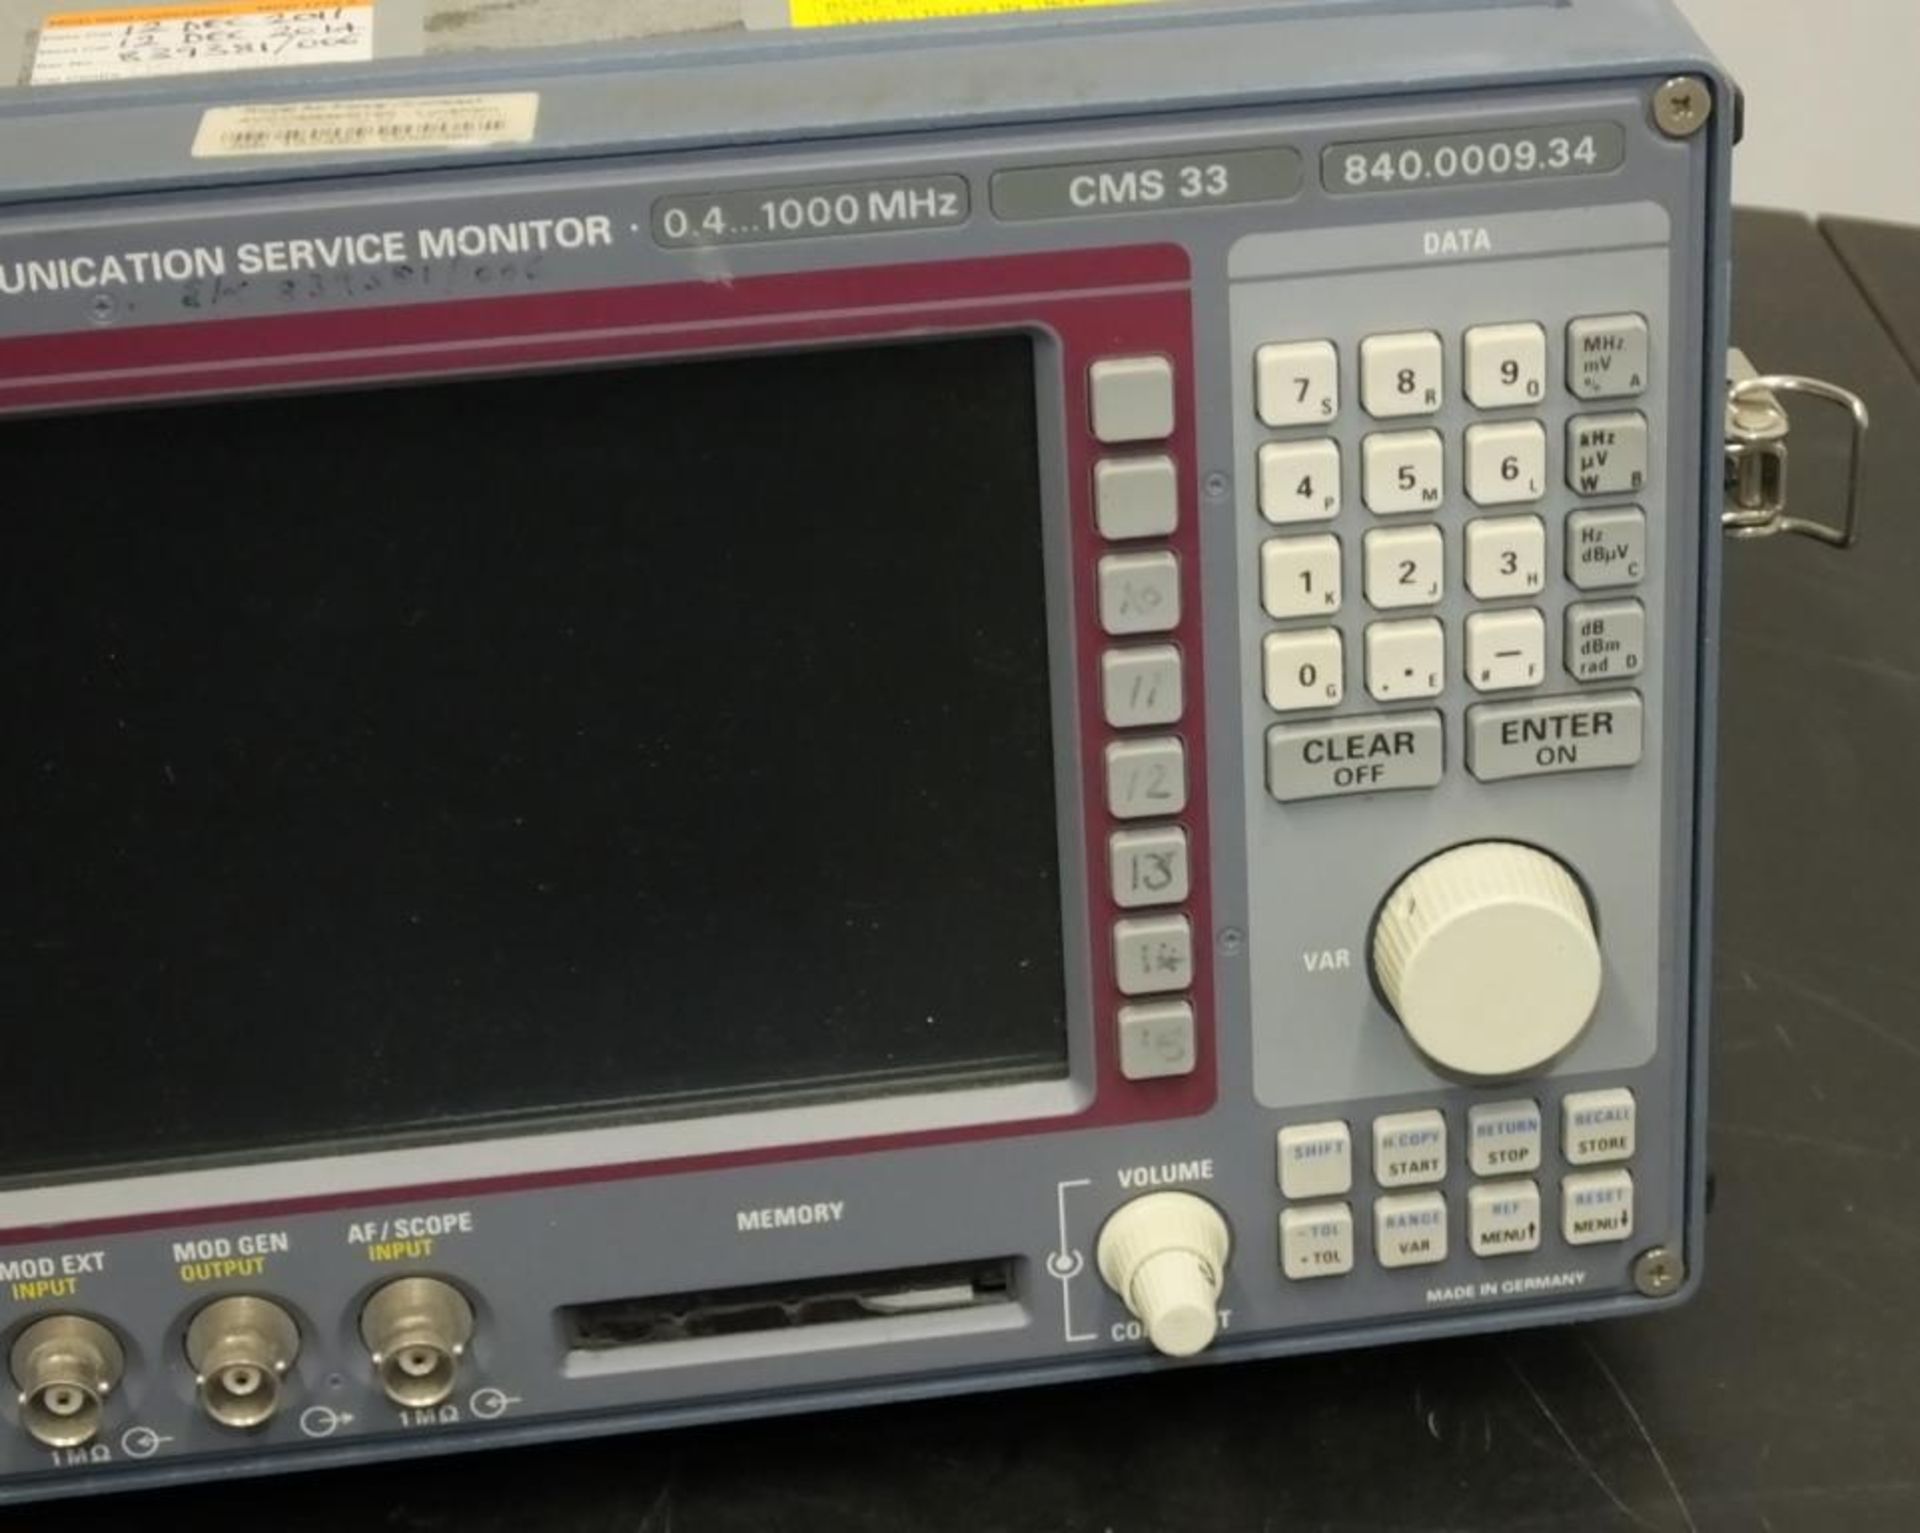 Rohde & Schwarz Radio Communications monitor 0.4 - 1000mhz - CMS33 - 840.0009.34, antenna base in co - Image 5 of 9